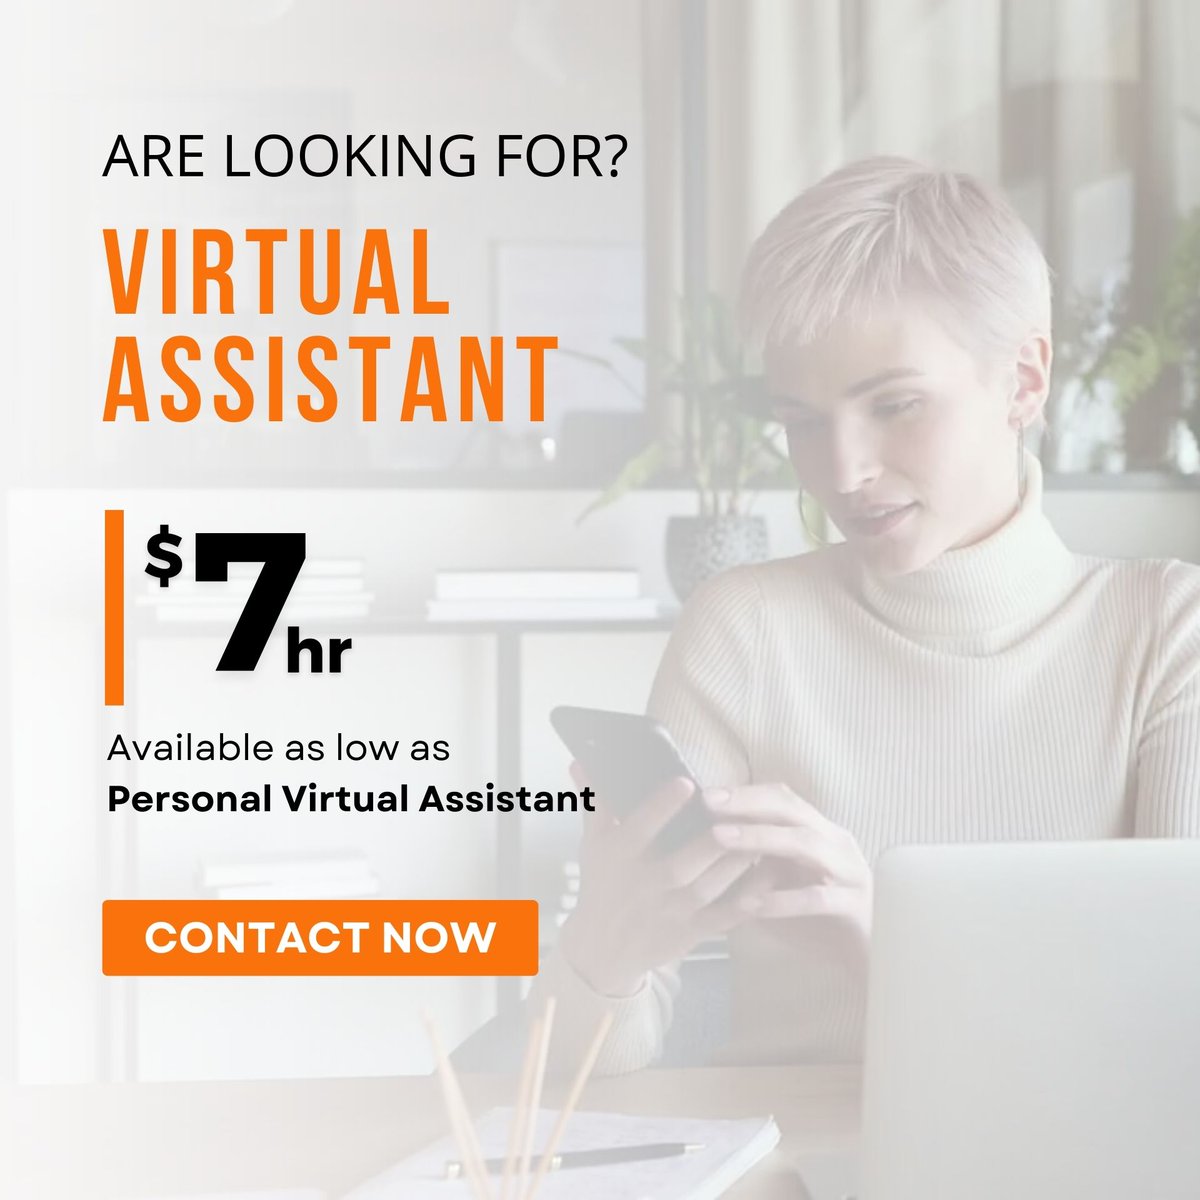 🤖 Need a Virtual Assistant? Look no further! 💼 Get top-notch support for just $7 per hour. 🕒 Available 24/7 to handle tasks efficiently. 📈 Boost productivity and save time with our affordable services!
.
.
.
#success #VirtualAssistant #AffordableSupport #ProductivityBoost